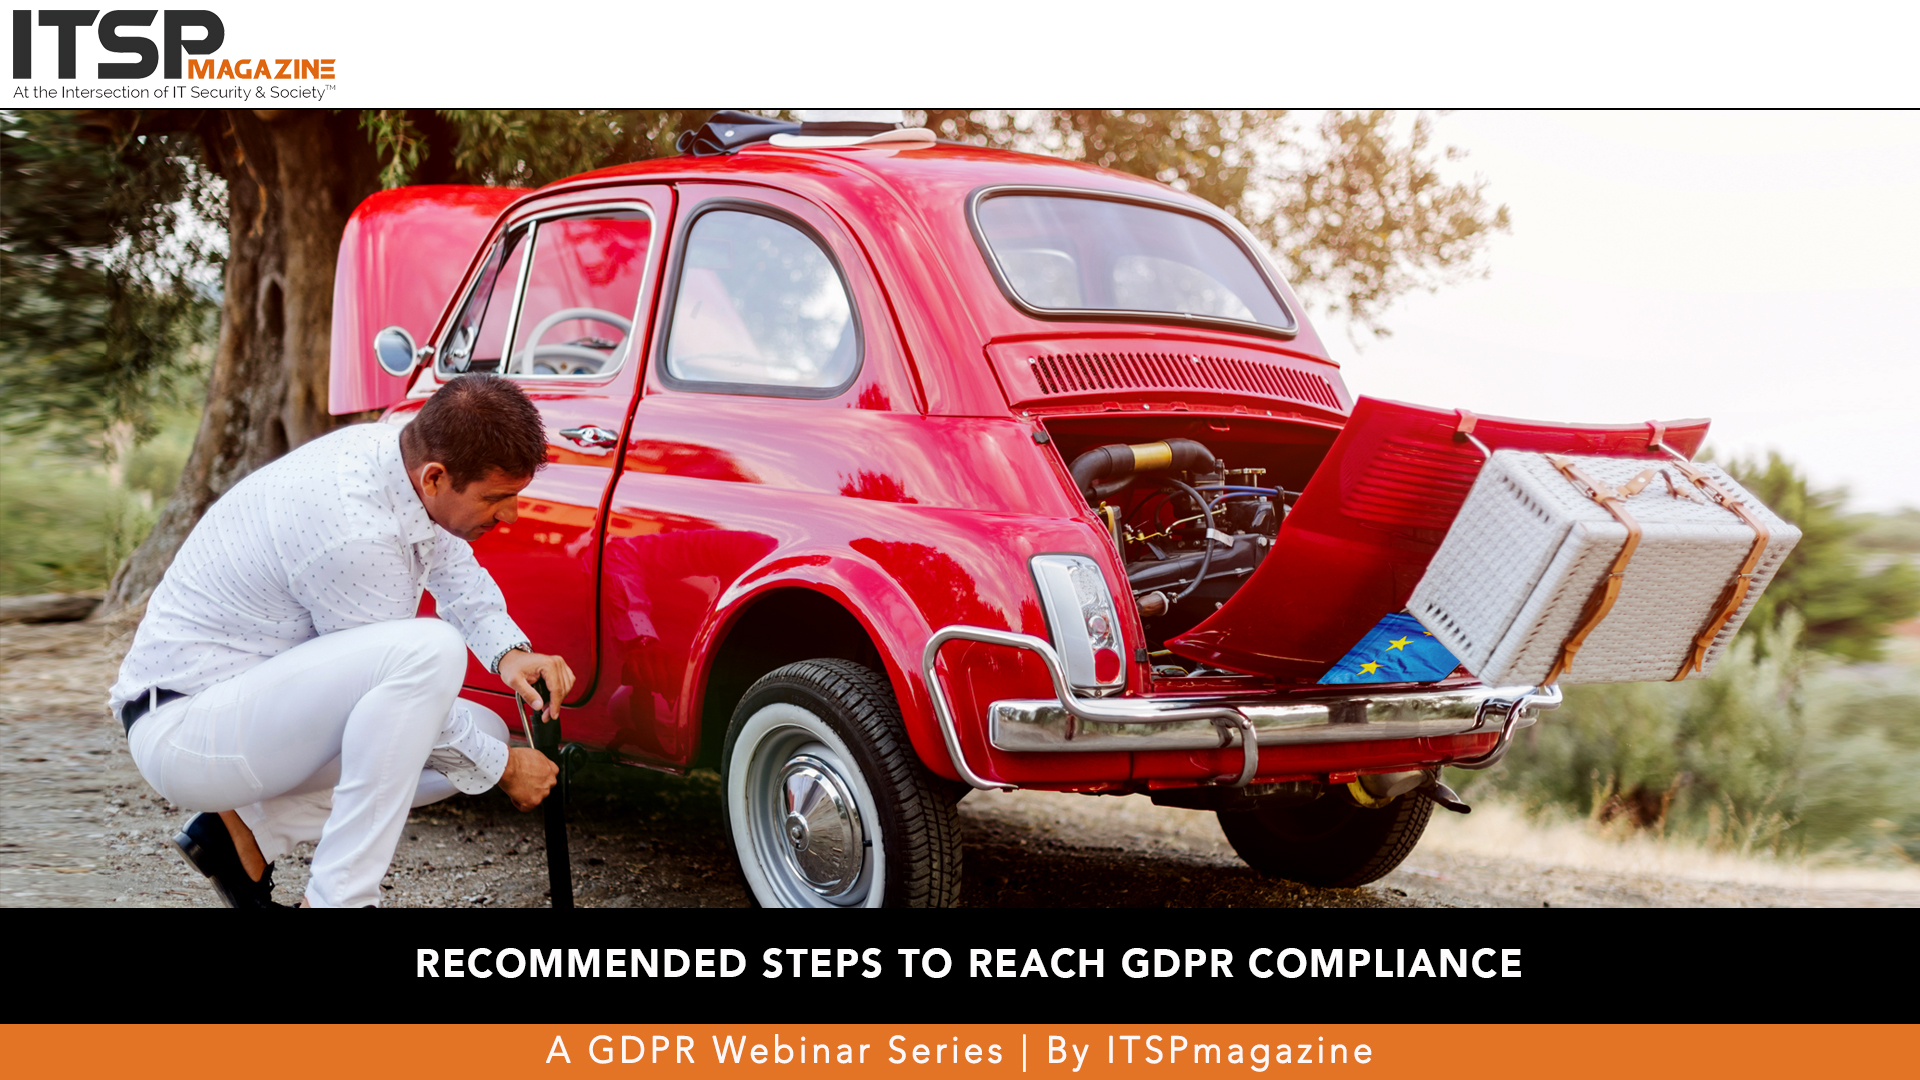 Webinar Part 2: Recommended Steps to Reach GDPR Compliance